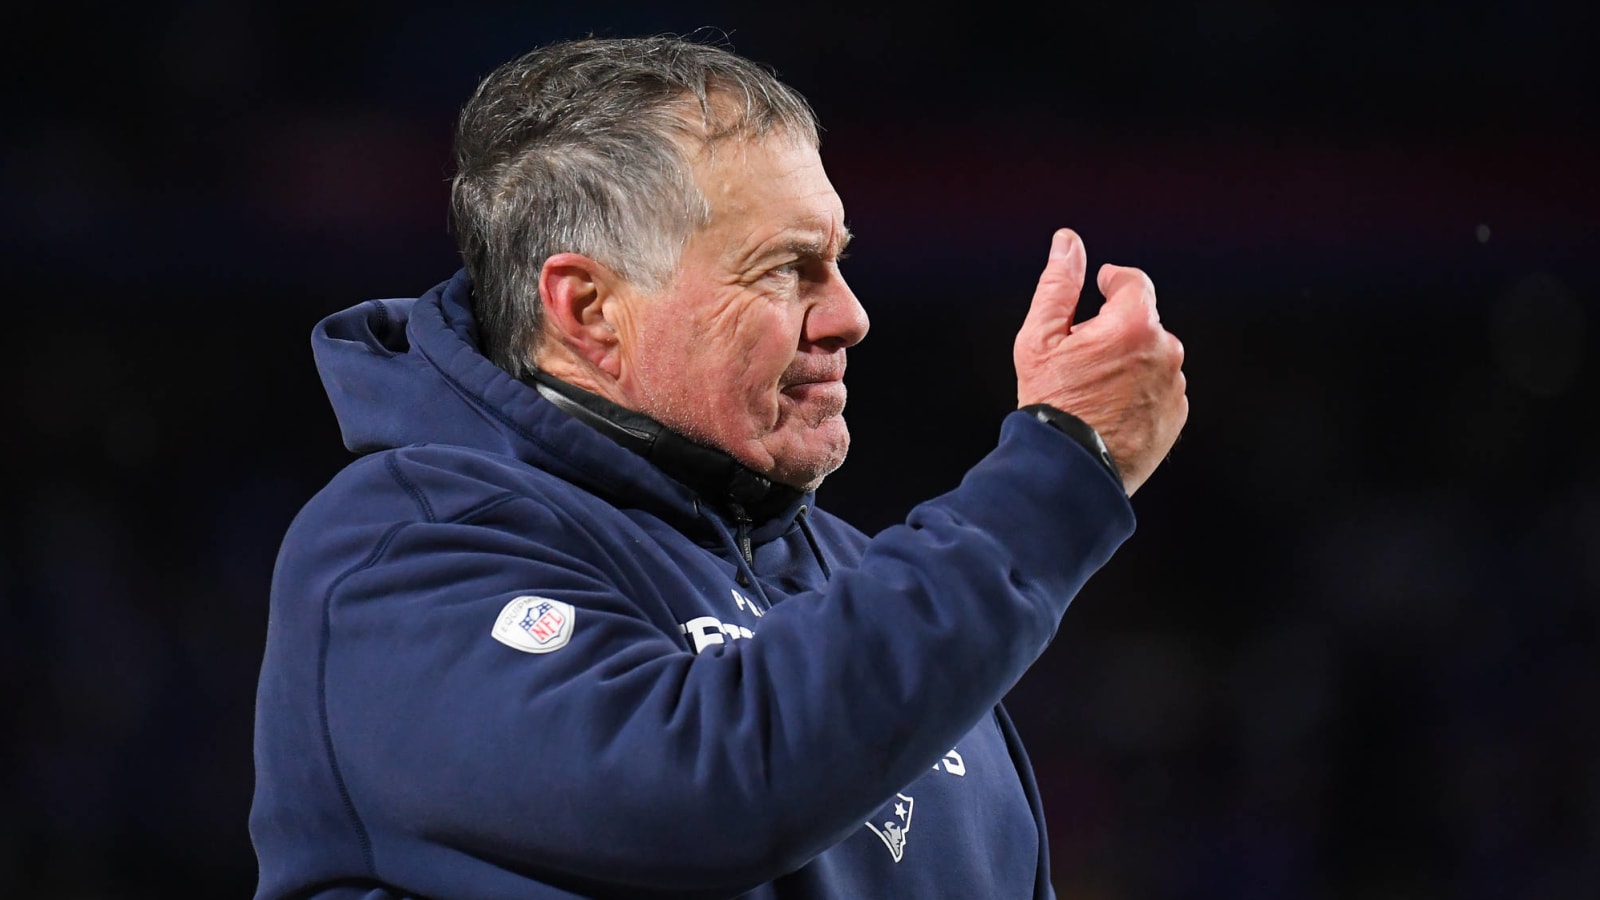 Did Bill Belichick hint at Patriots’ gameplan with face mask?